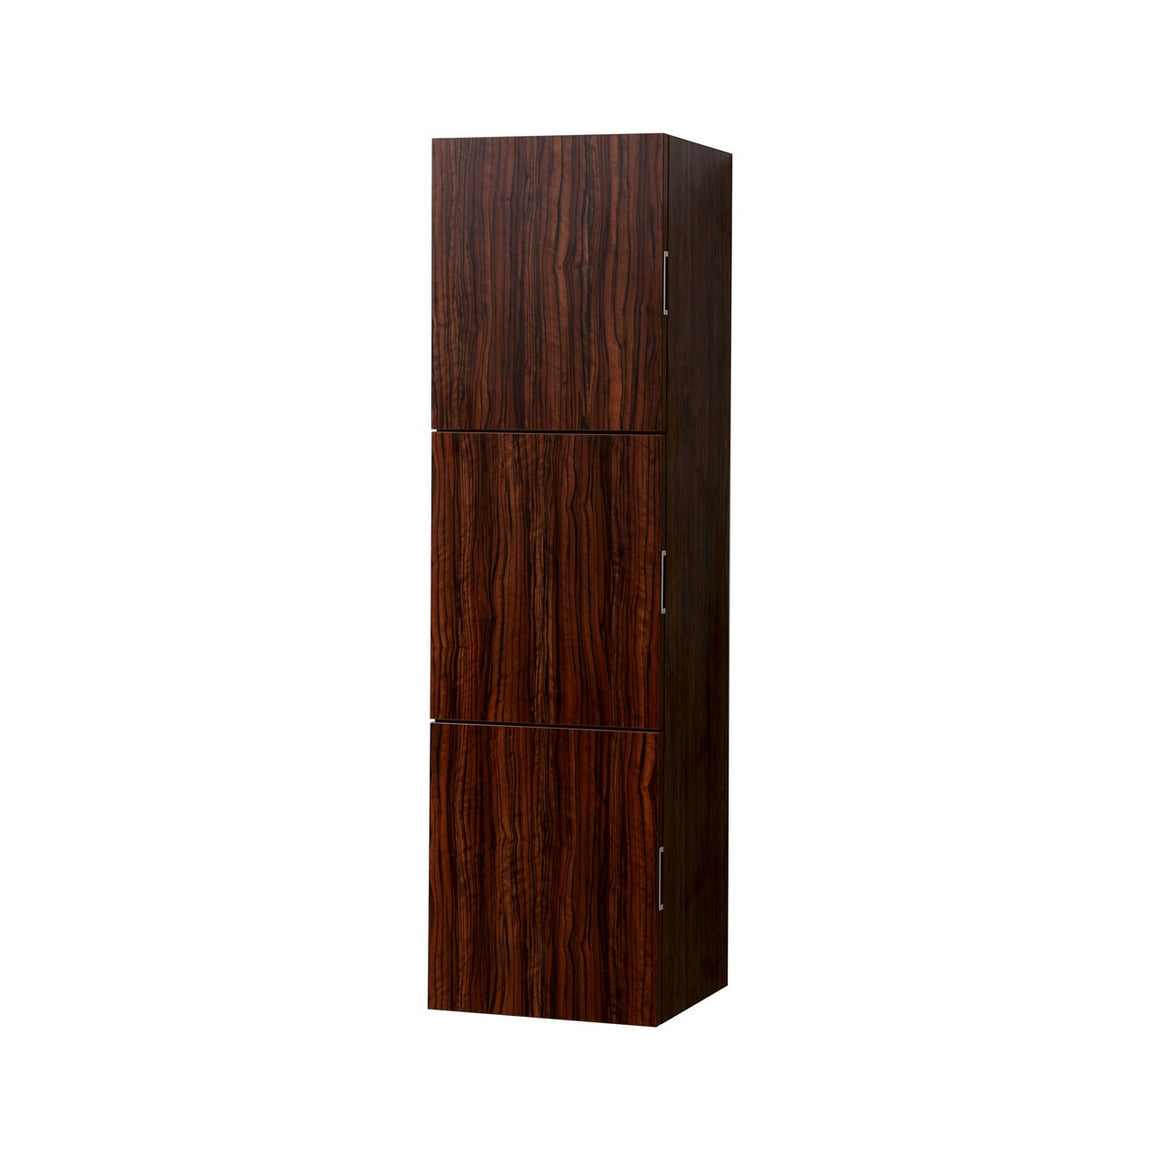 Bliss 18" Wide by 59" High Linen Side Cabinet With Three Doors in Walnut Finish